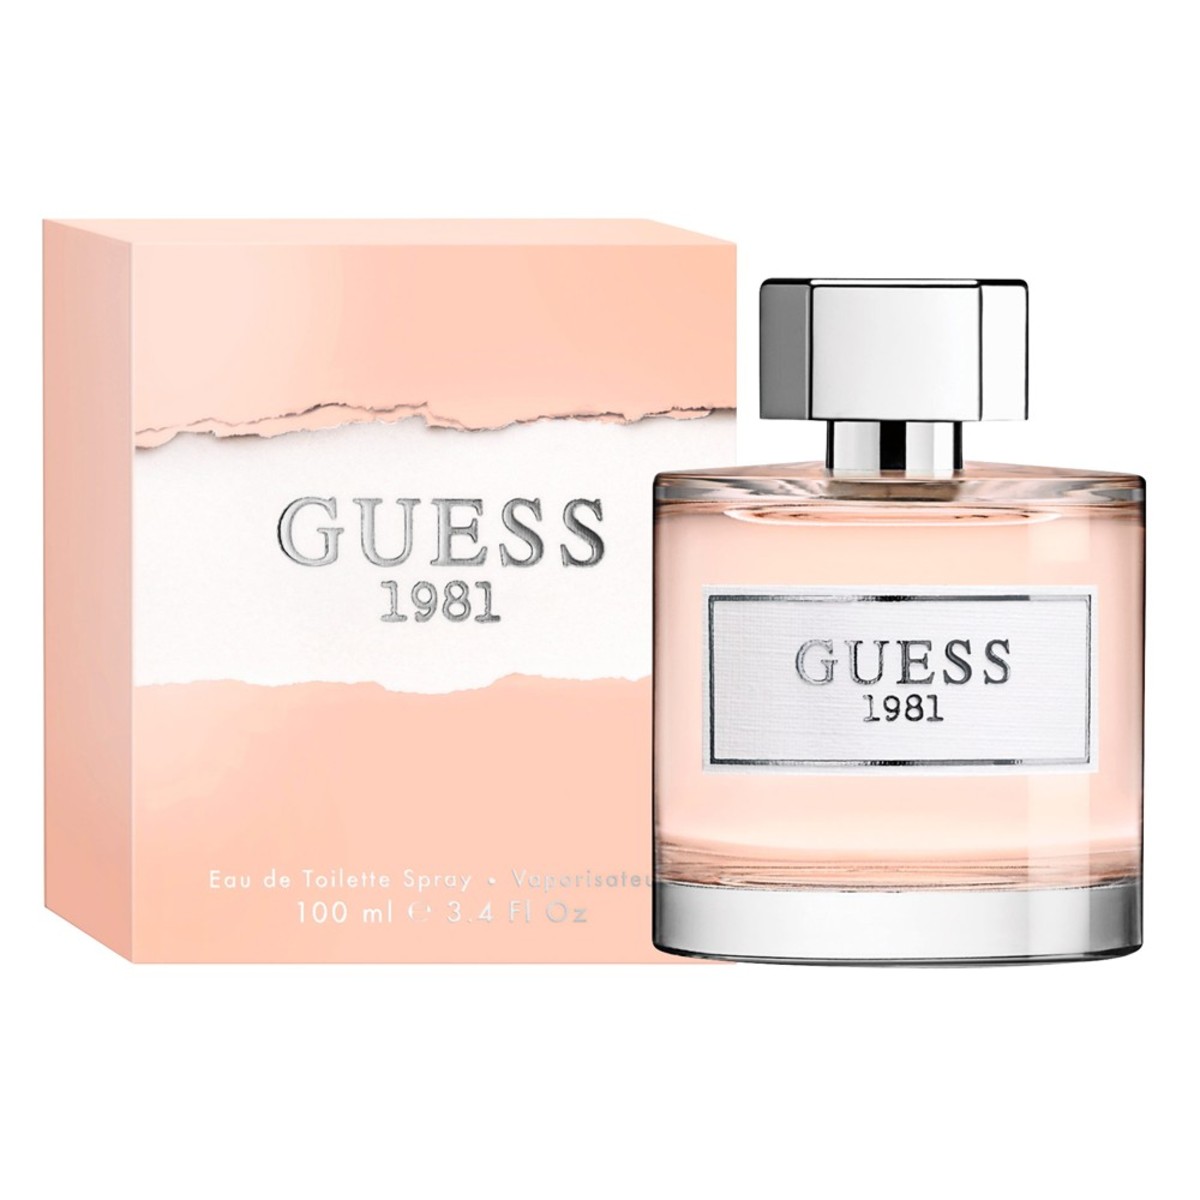 Guess 1981 EDT for Women 100ml